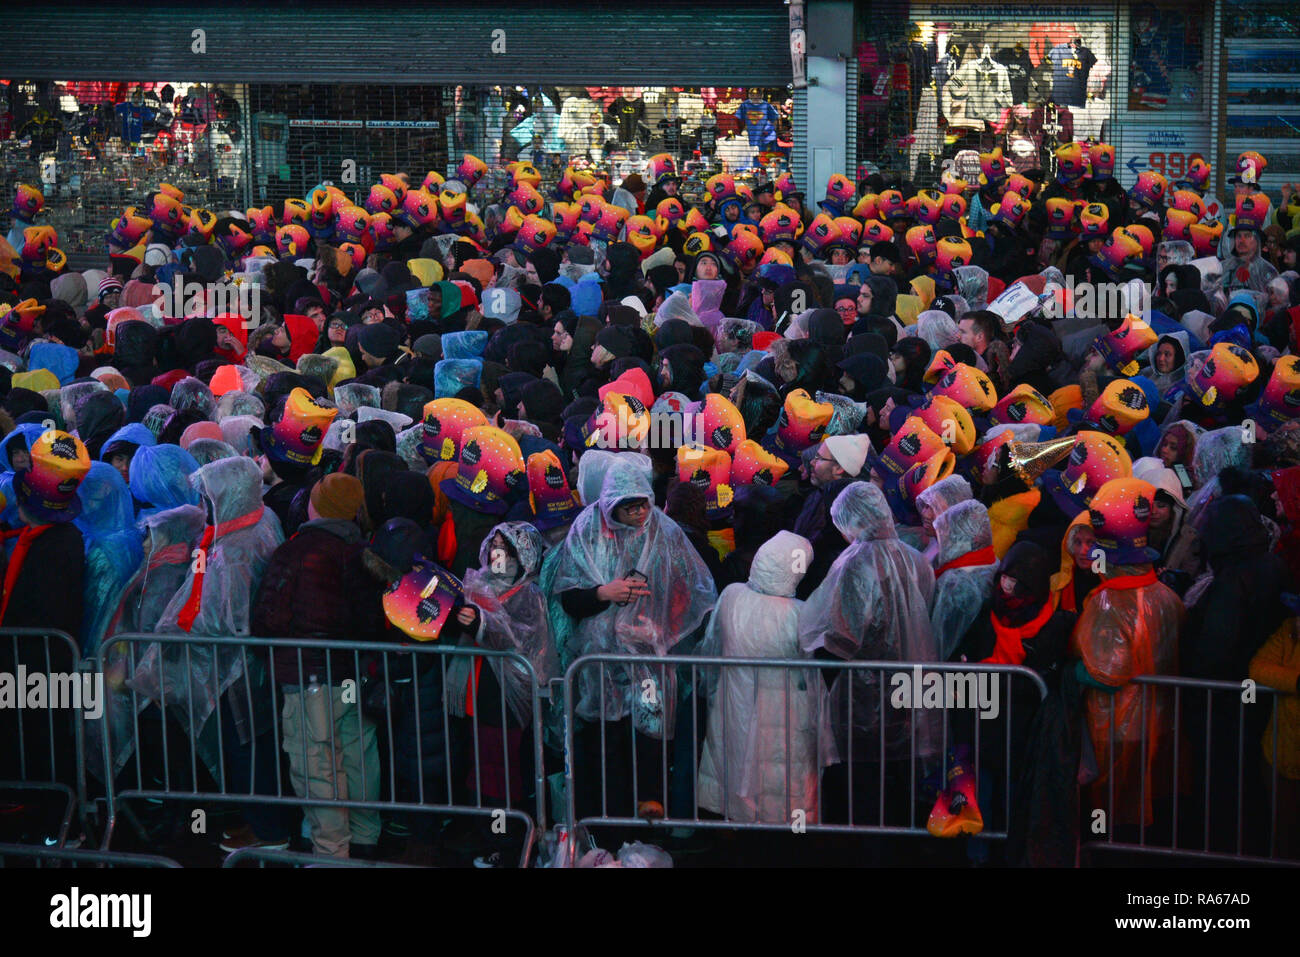 New York, USA. 31st December, 2018. New Years Eve revelers are seen during the Times Square New Year's Eve 2019 Celebration on December 31, 2018 in New York City. Credit: Erik Pendzich/Alamy Live News Stock Photo